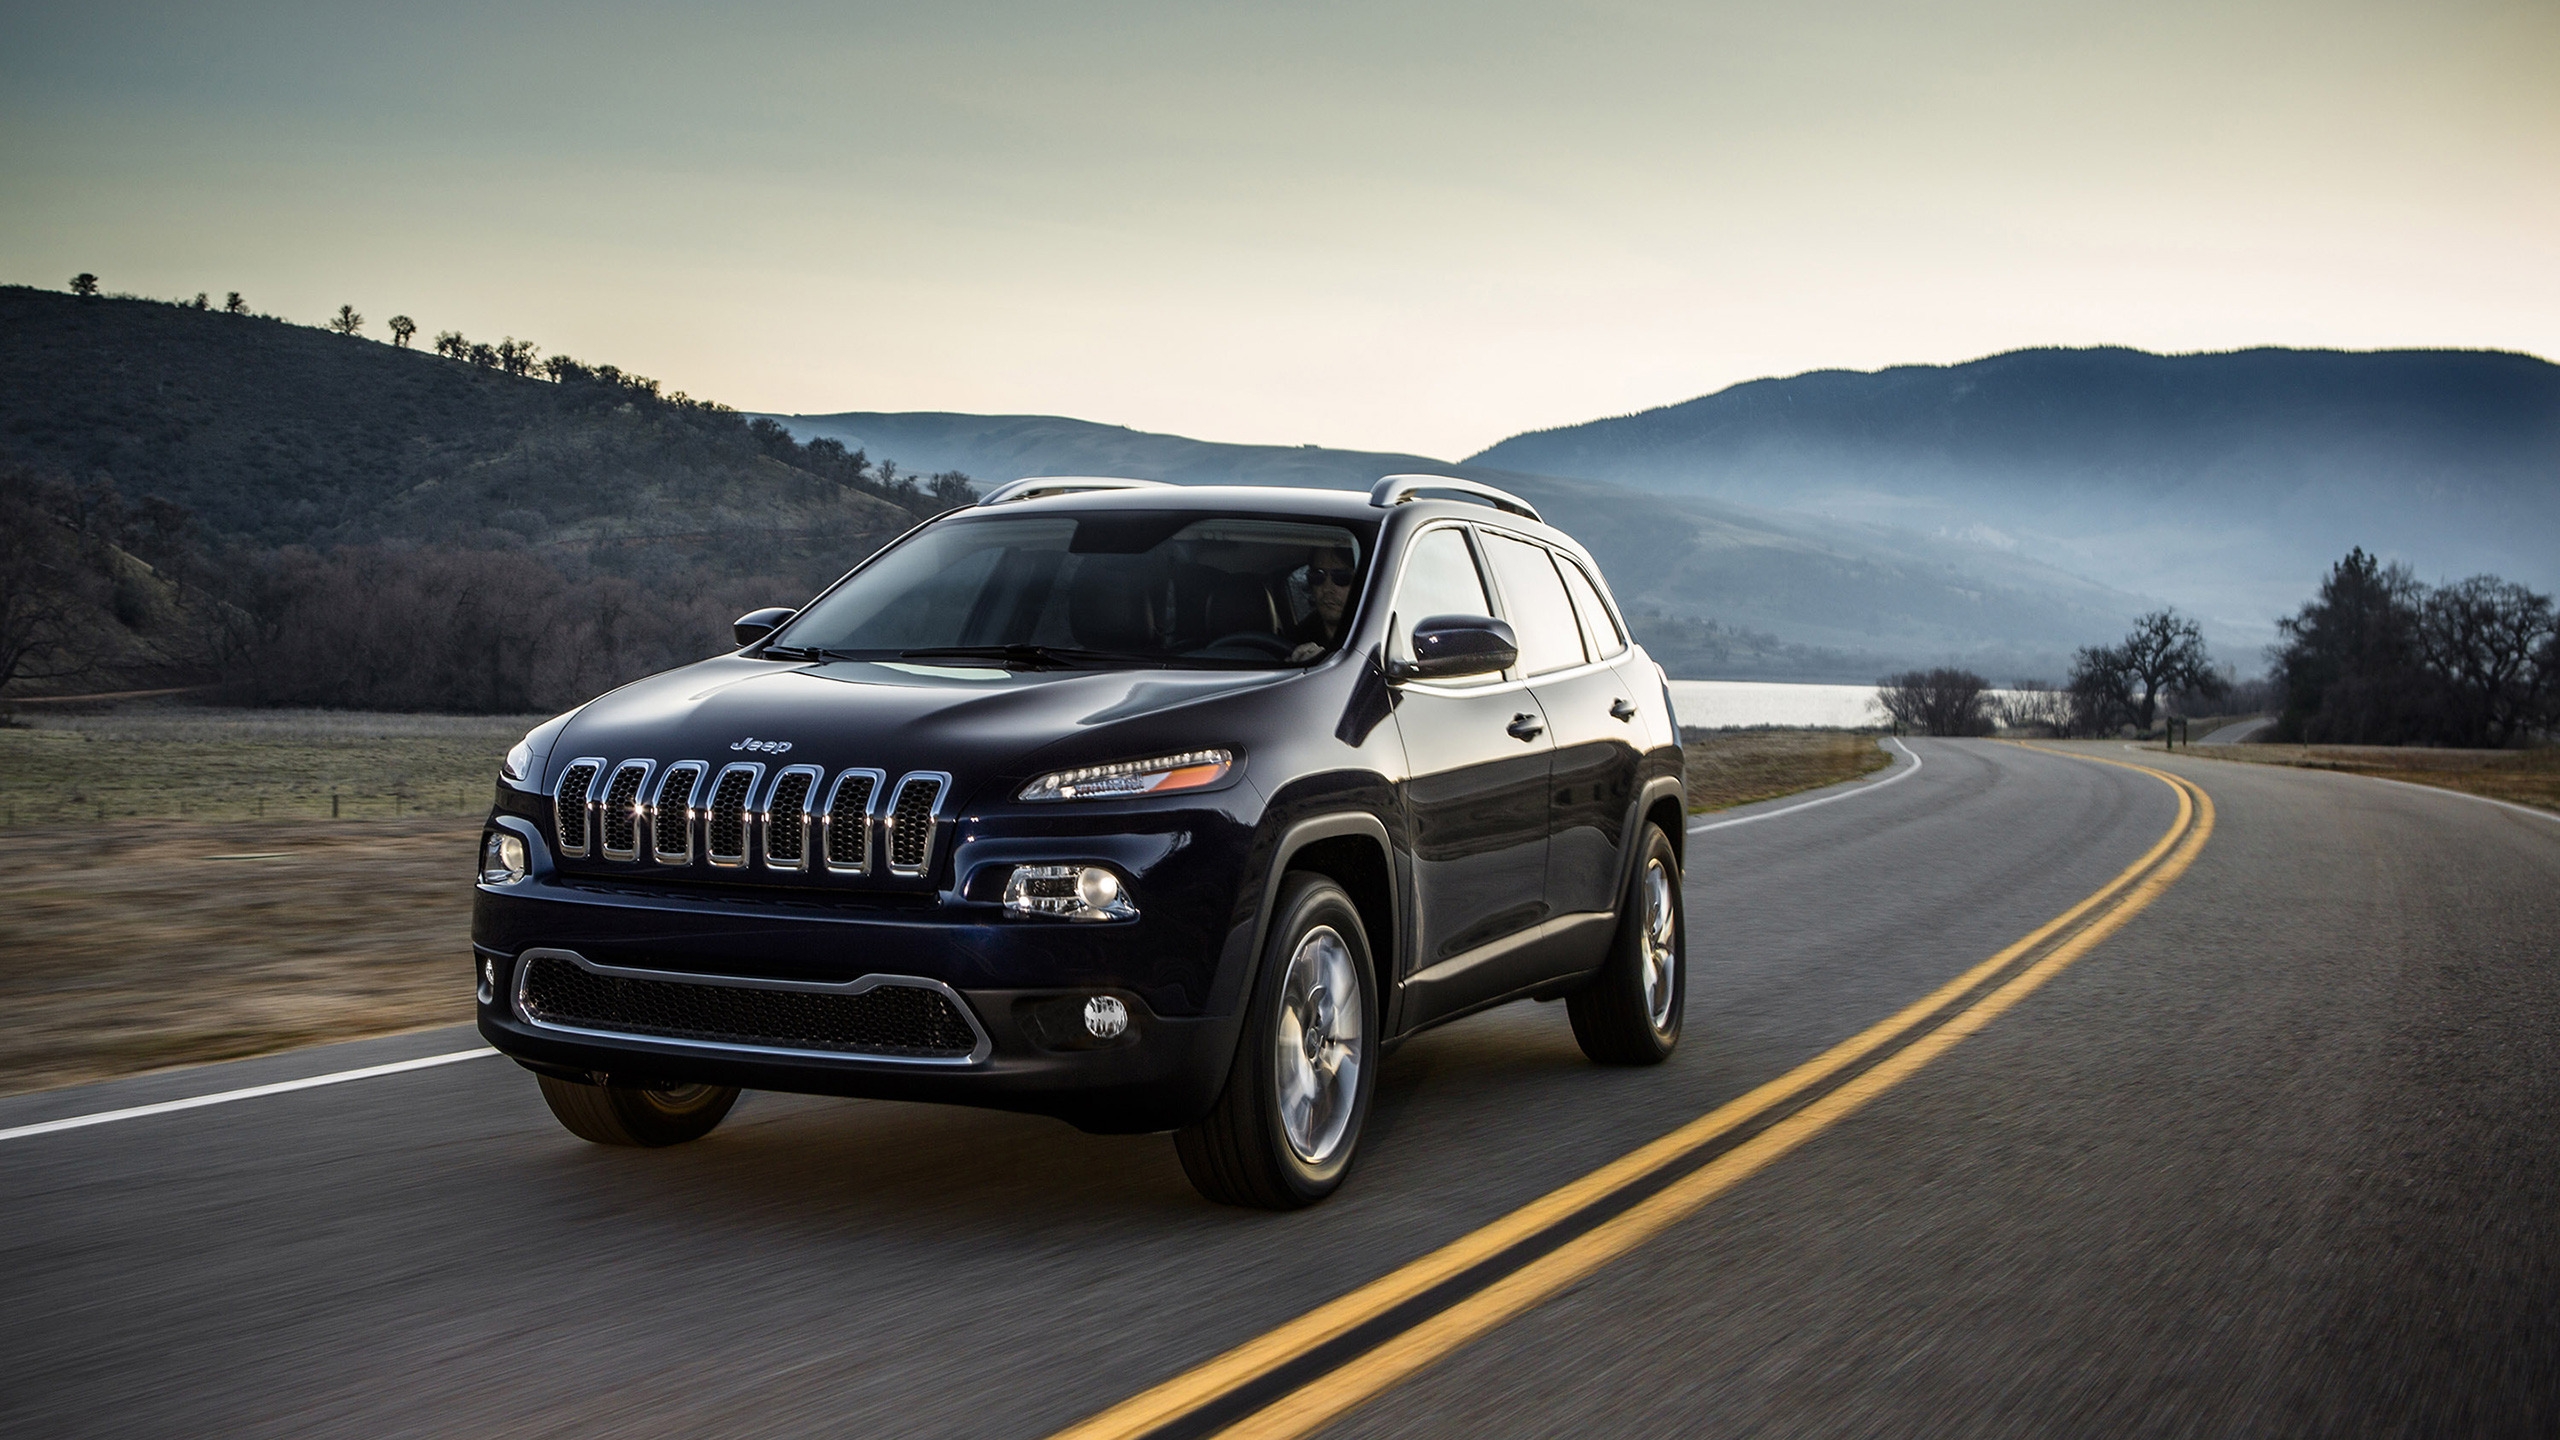 Jeep Cherokee 2014 Edition for 2560x1440 HDTV resolution